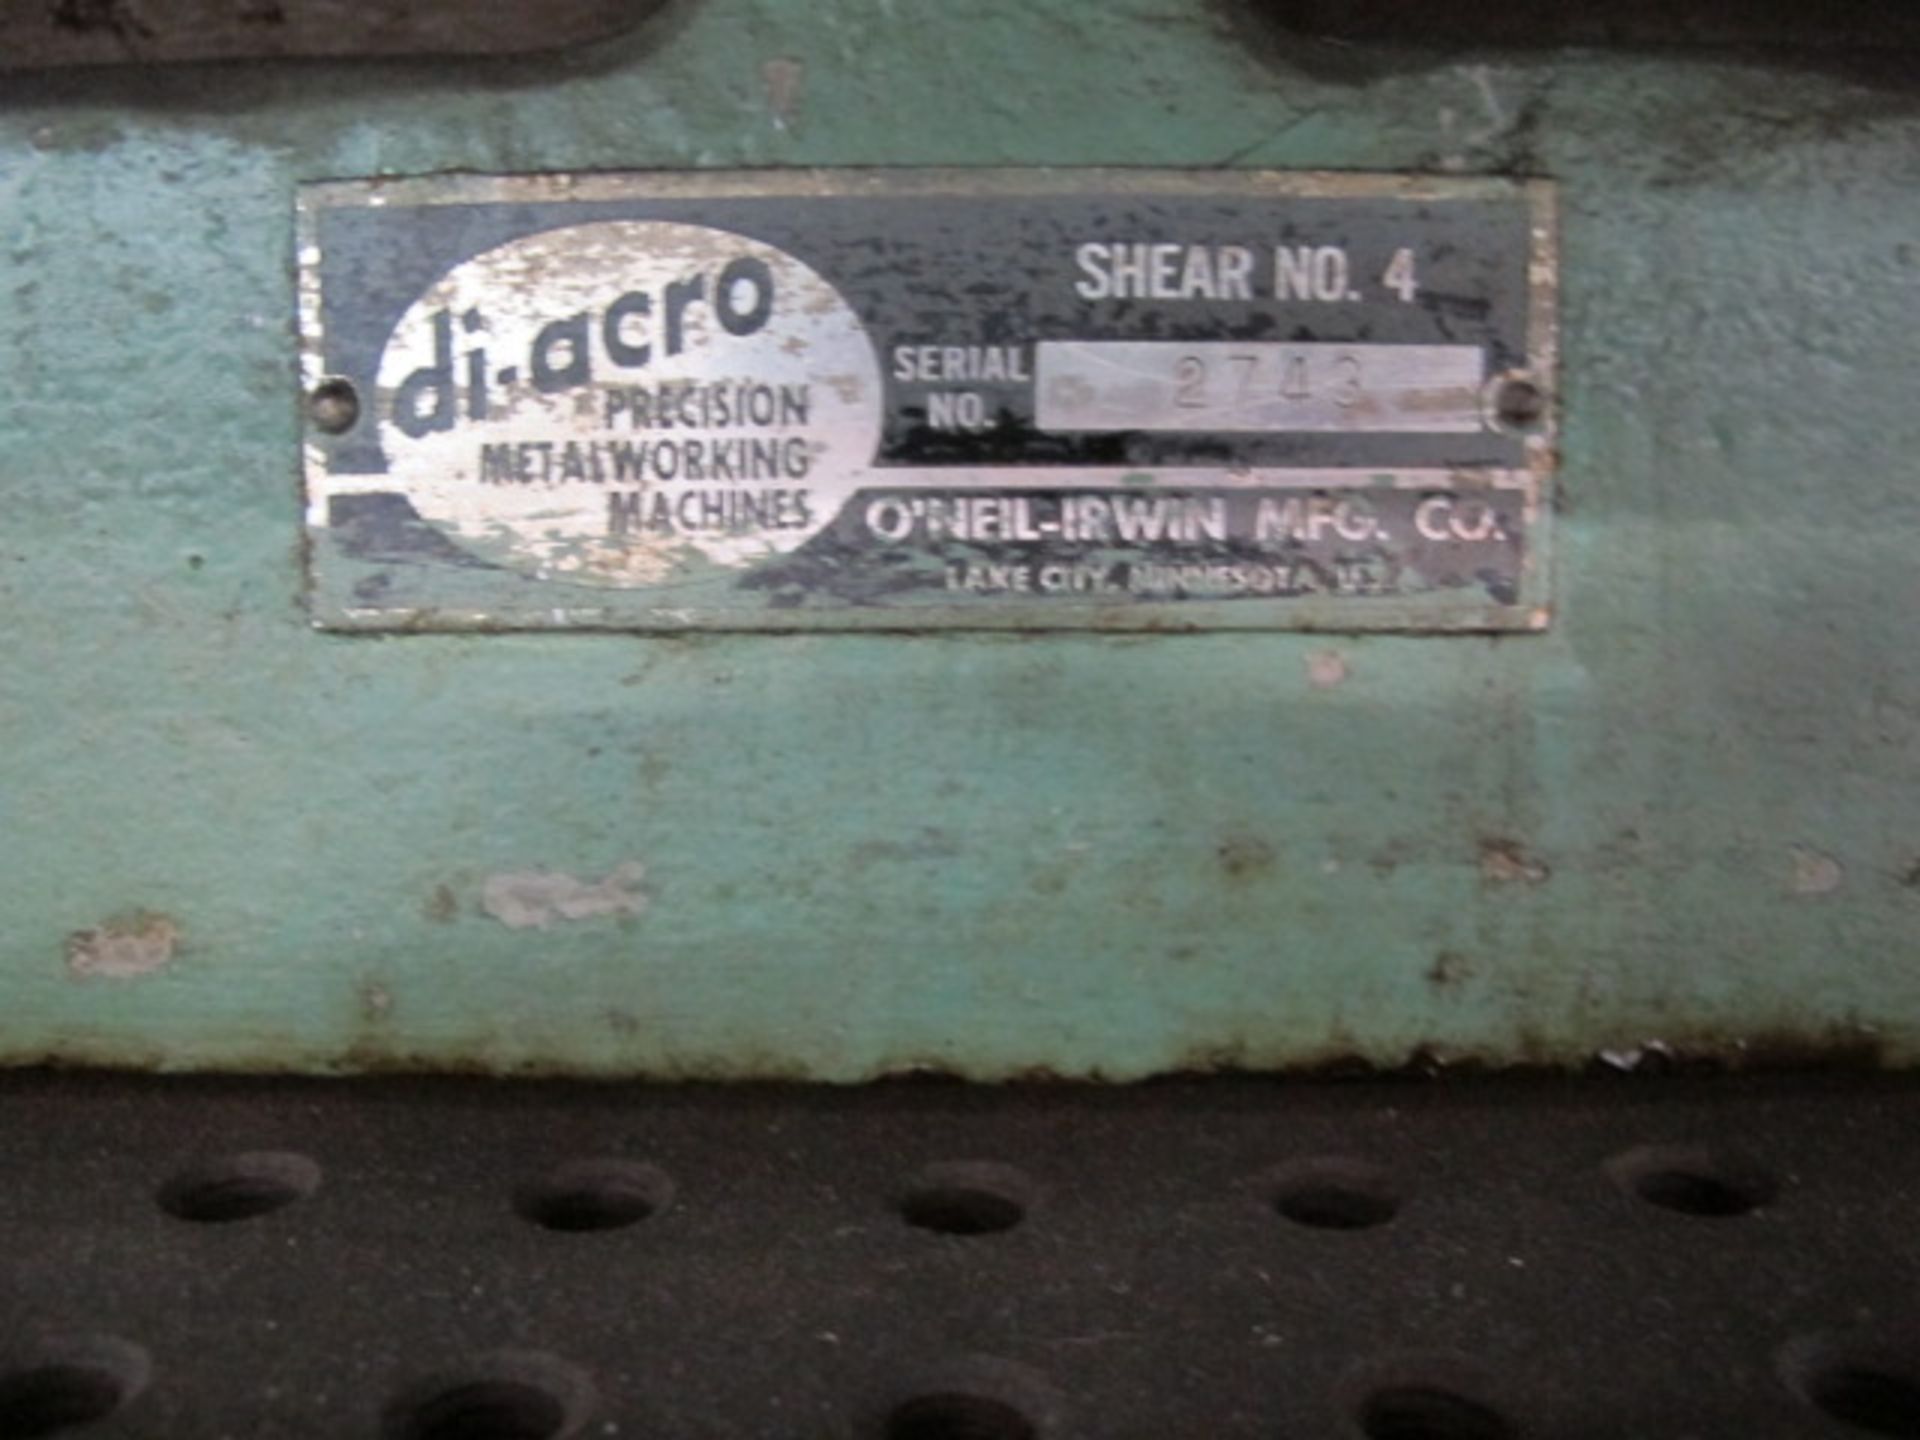 DiAcro No.4 24” Hand Shear and Steel Table - Image 3 of 3